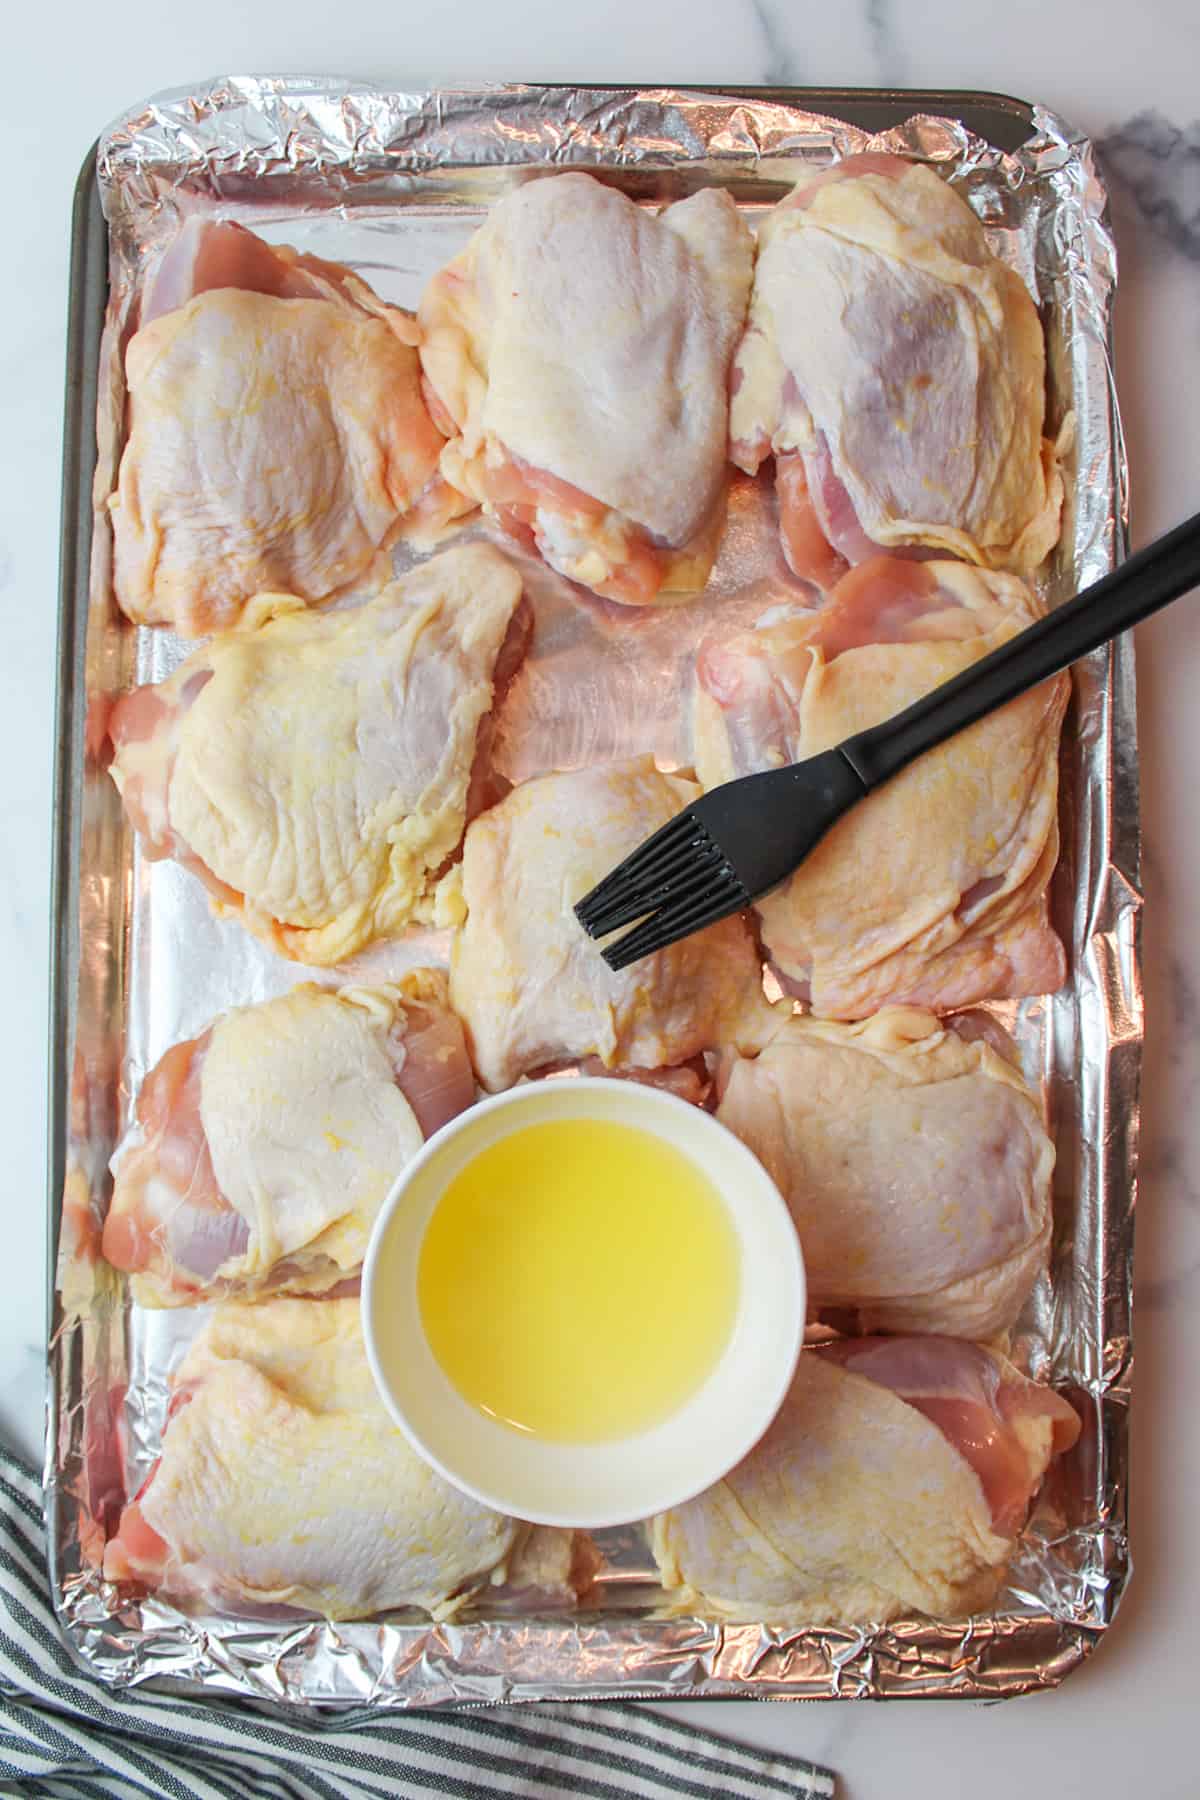 brushing olive oil over the top of the chicken thigh skin on a foil lined baking sheet.